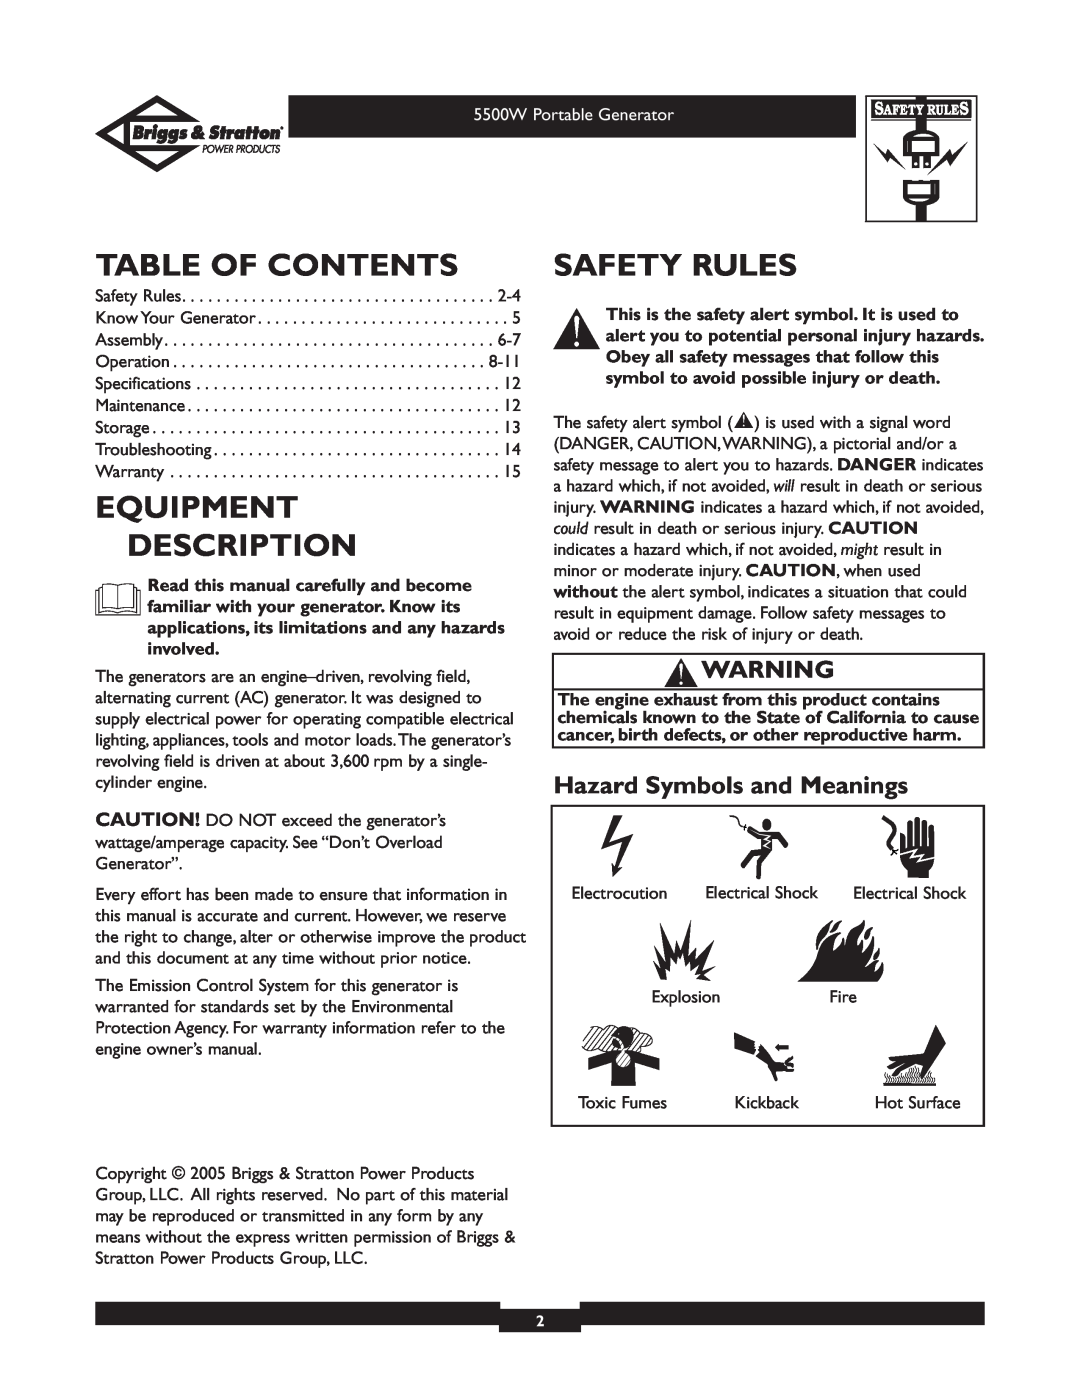 Briggs & Stratton 030209 owner manual Table Of Contents, Equipment Description, Safety Rules, Hazard Symbols and Meanings 